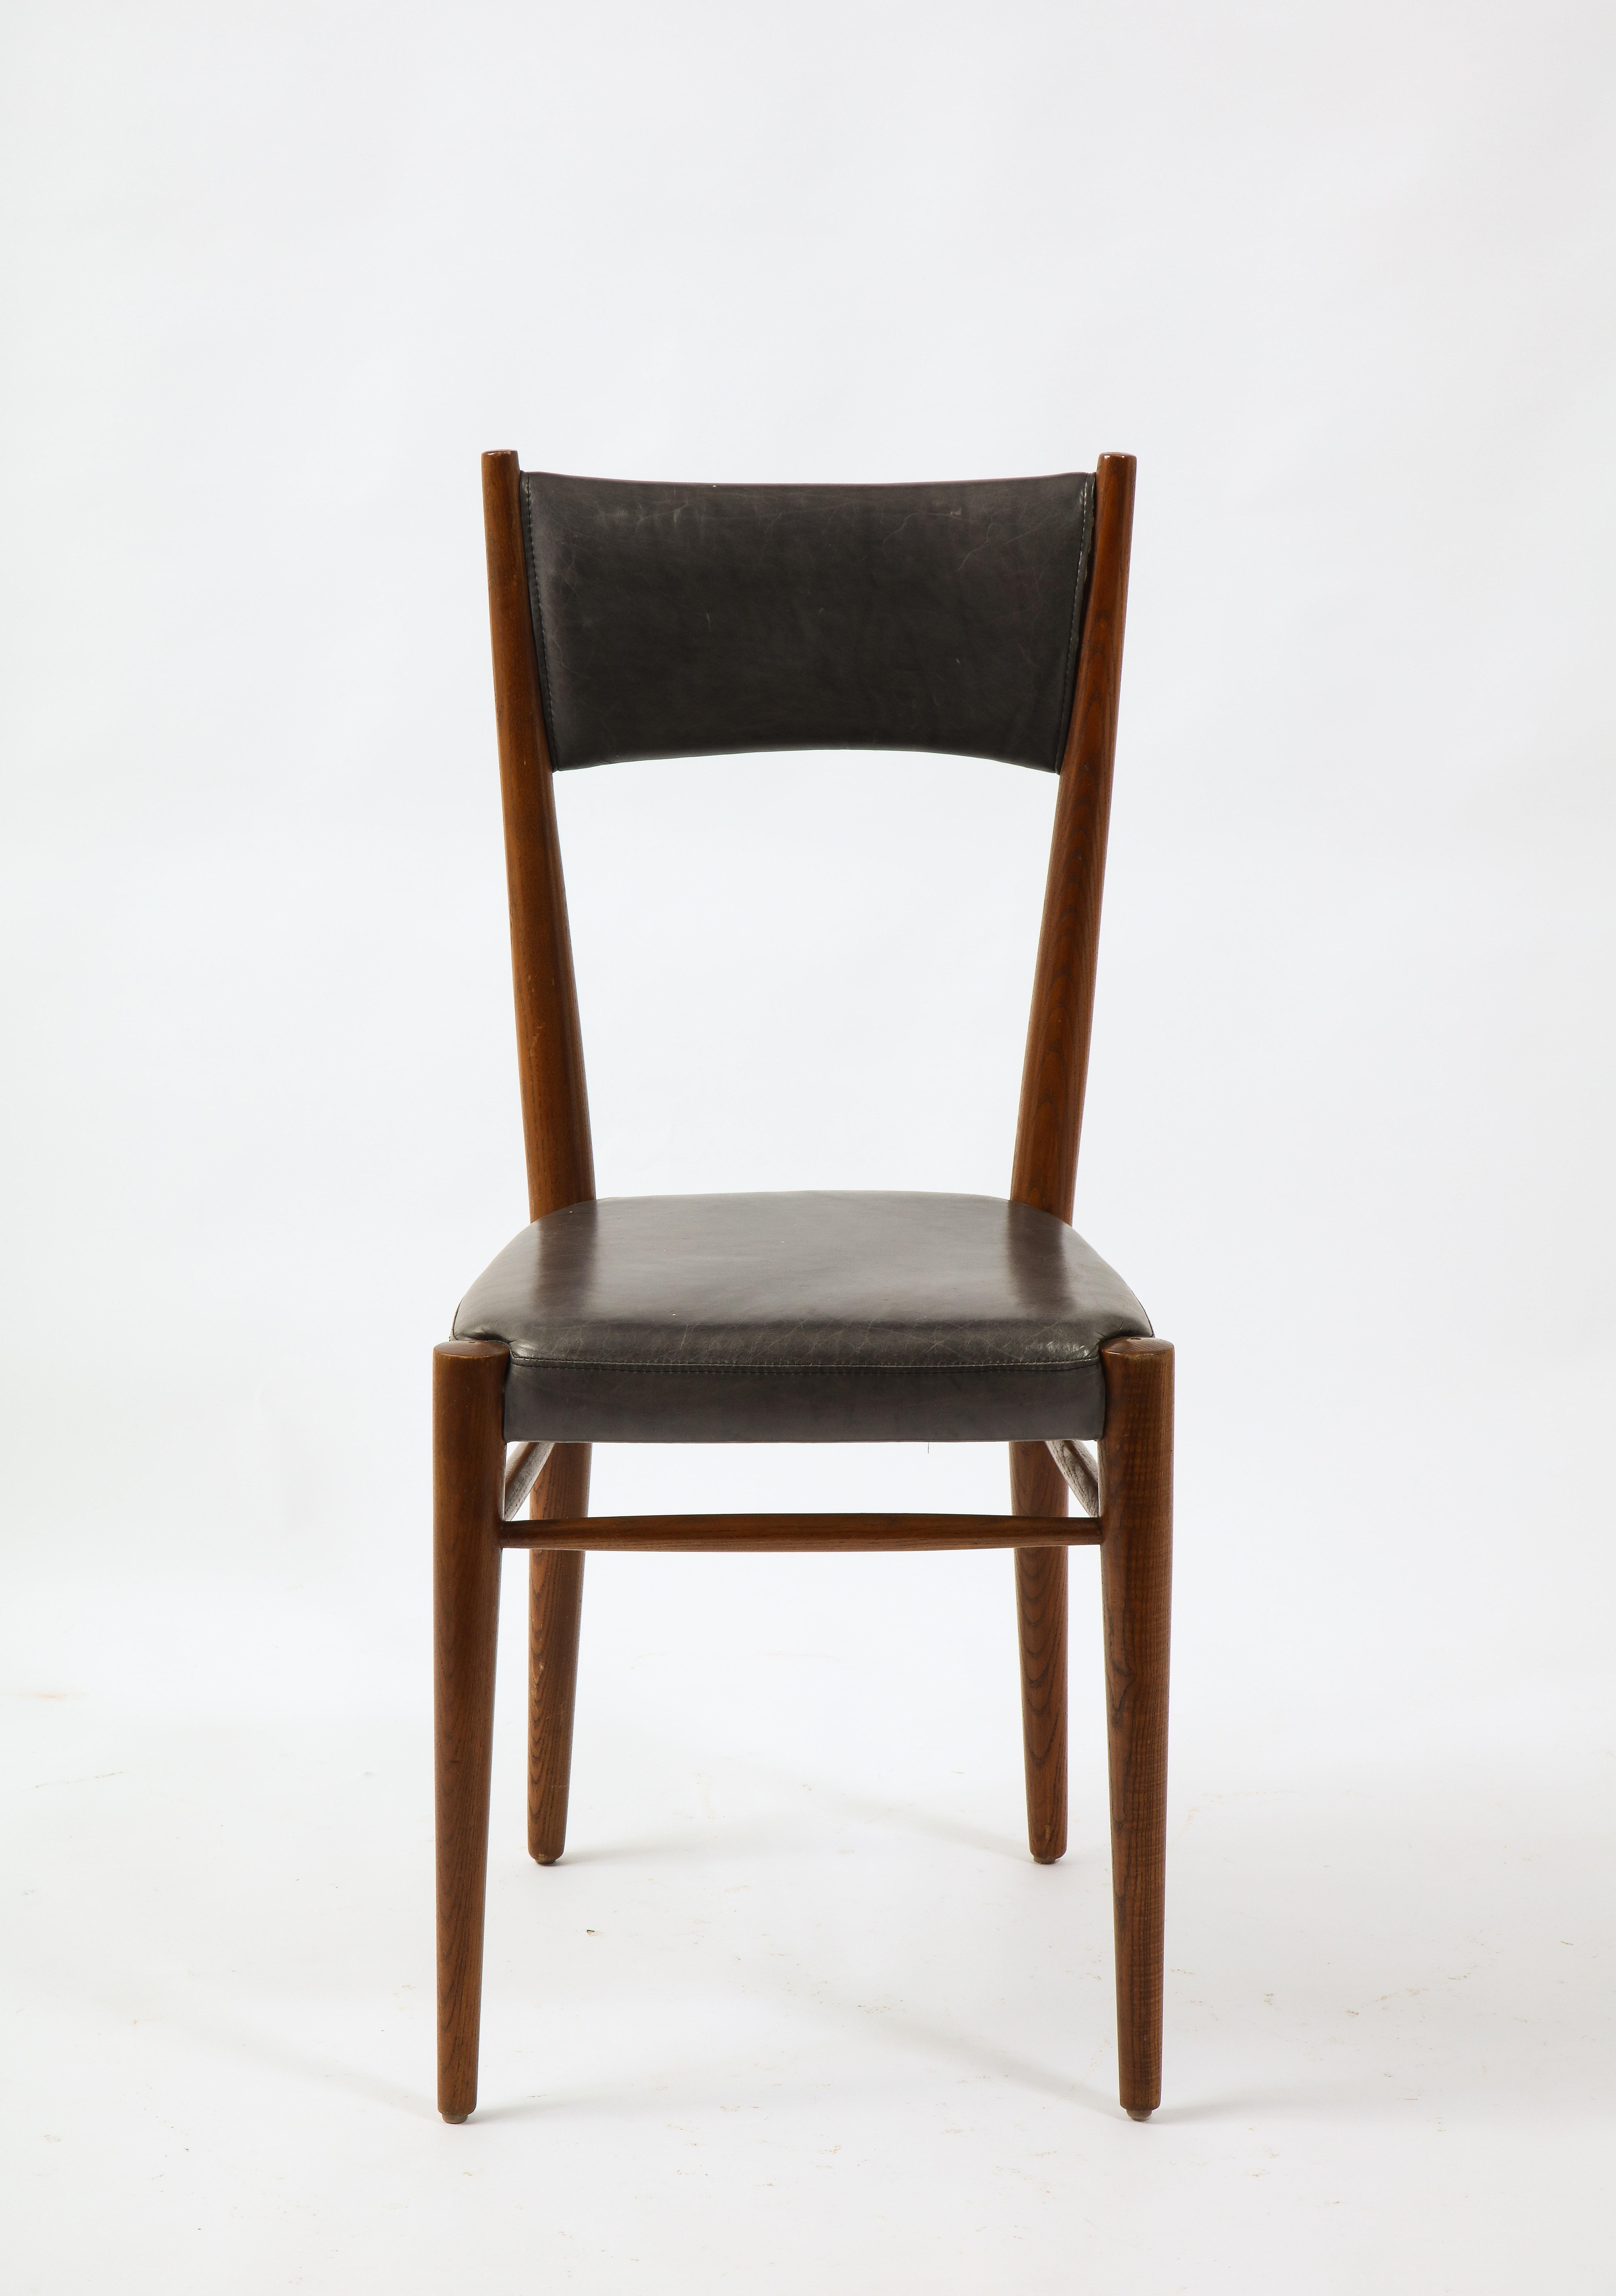 Set of six side chairs by Genevieve Pons, Leather over oak. These chairs are very upright.